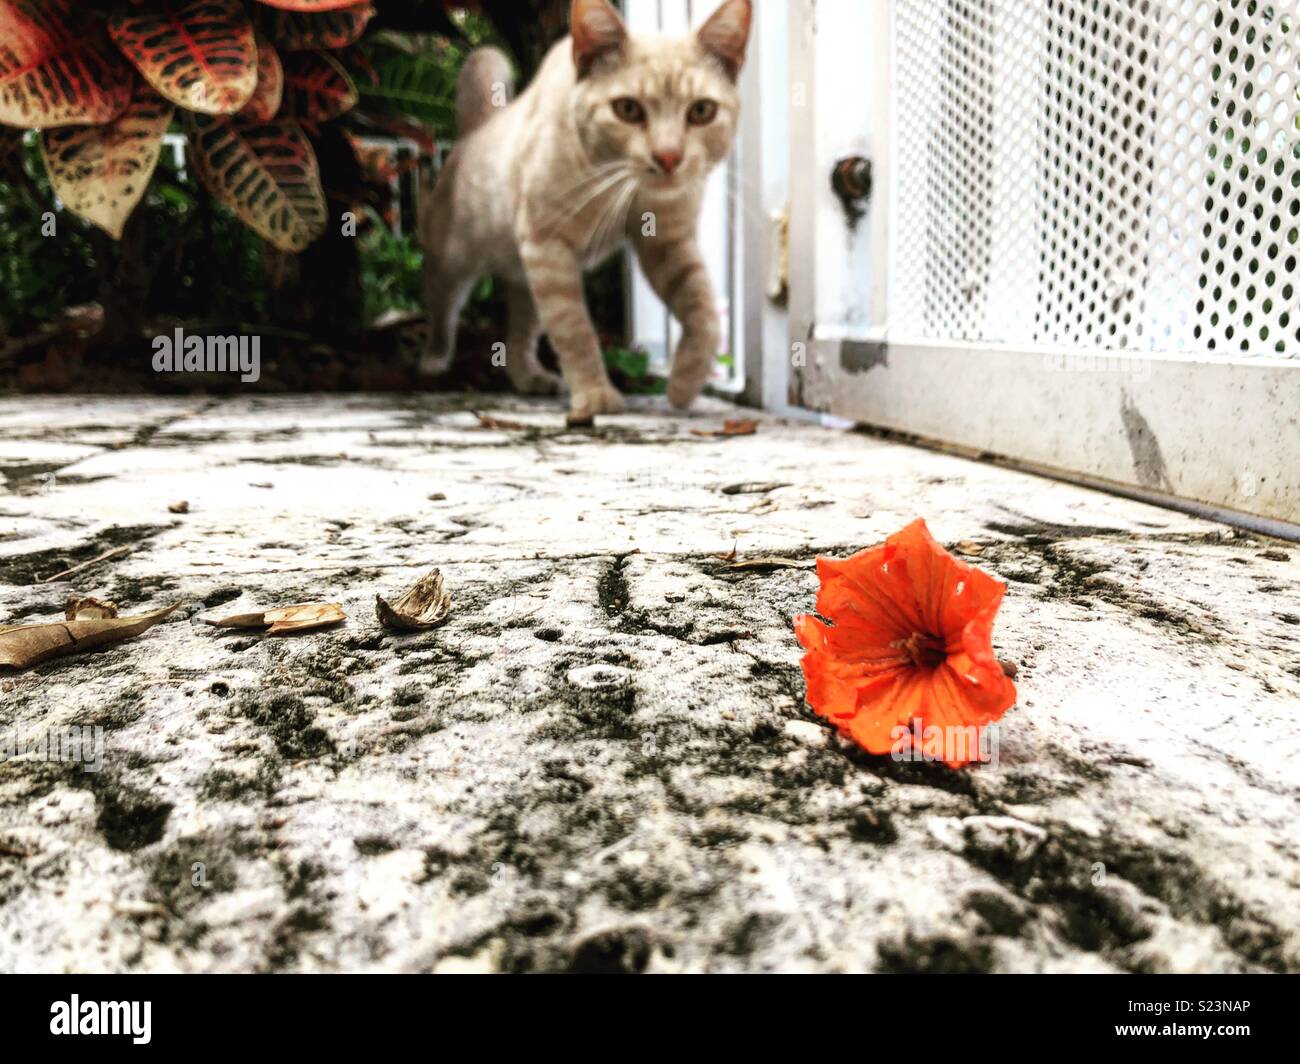 Miami cats and flowers Stock Photo